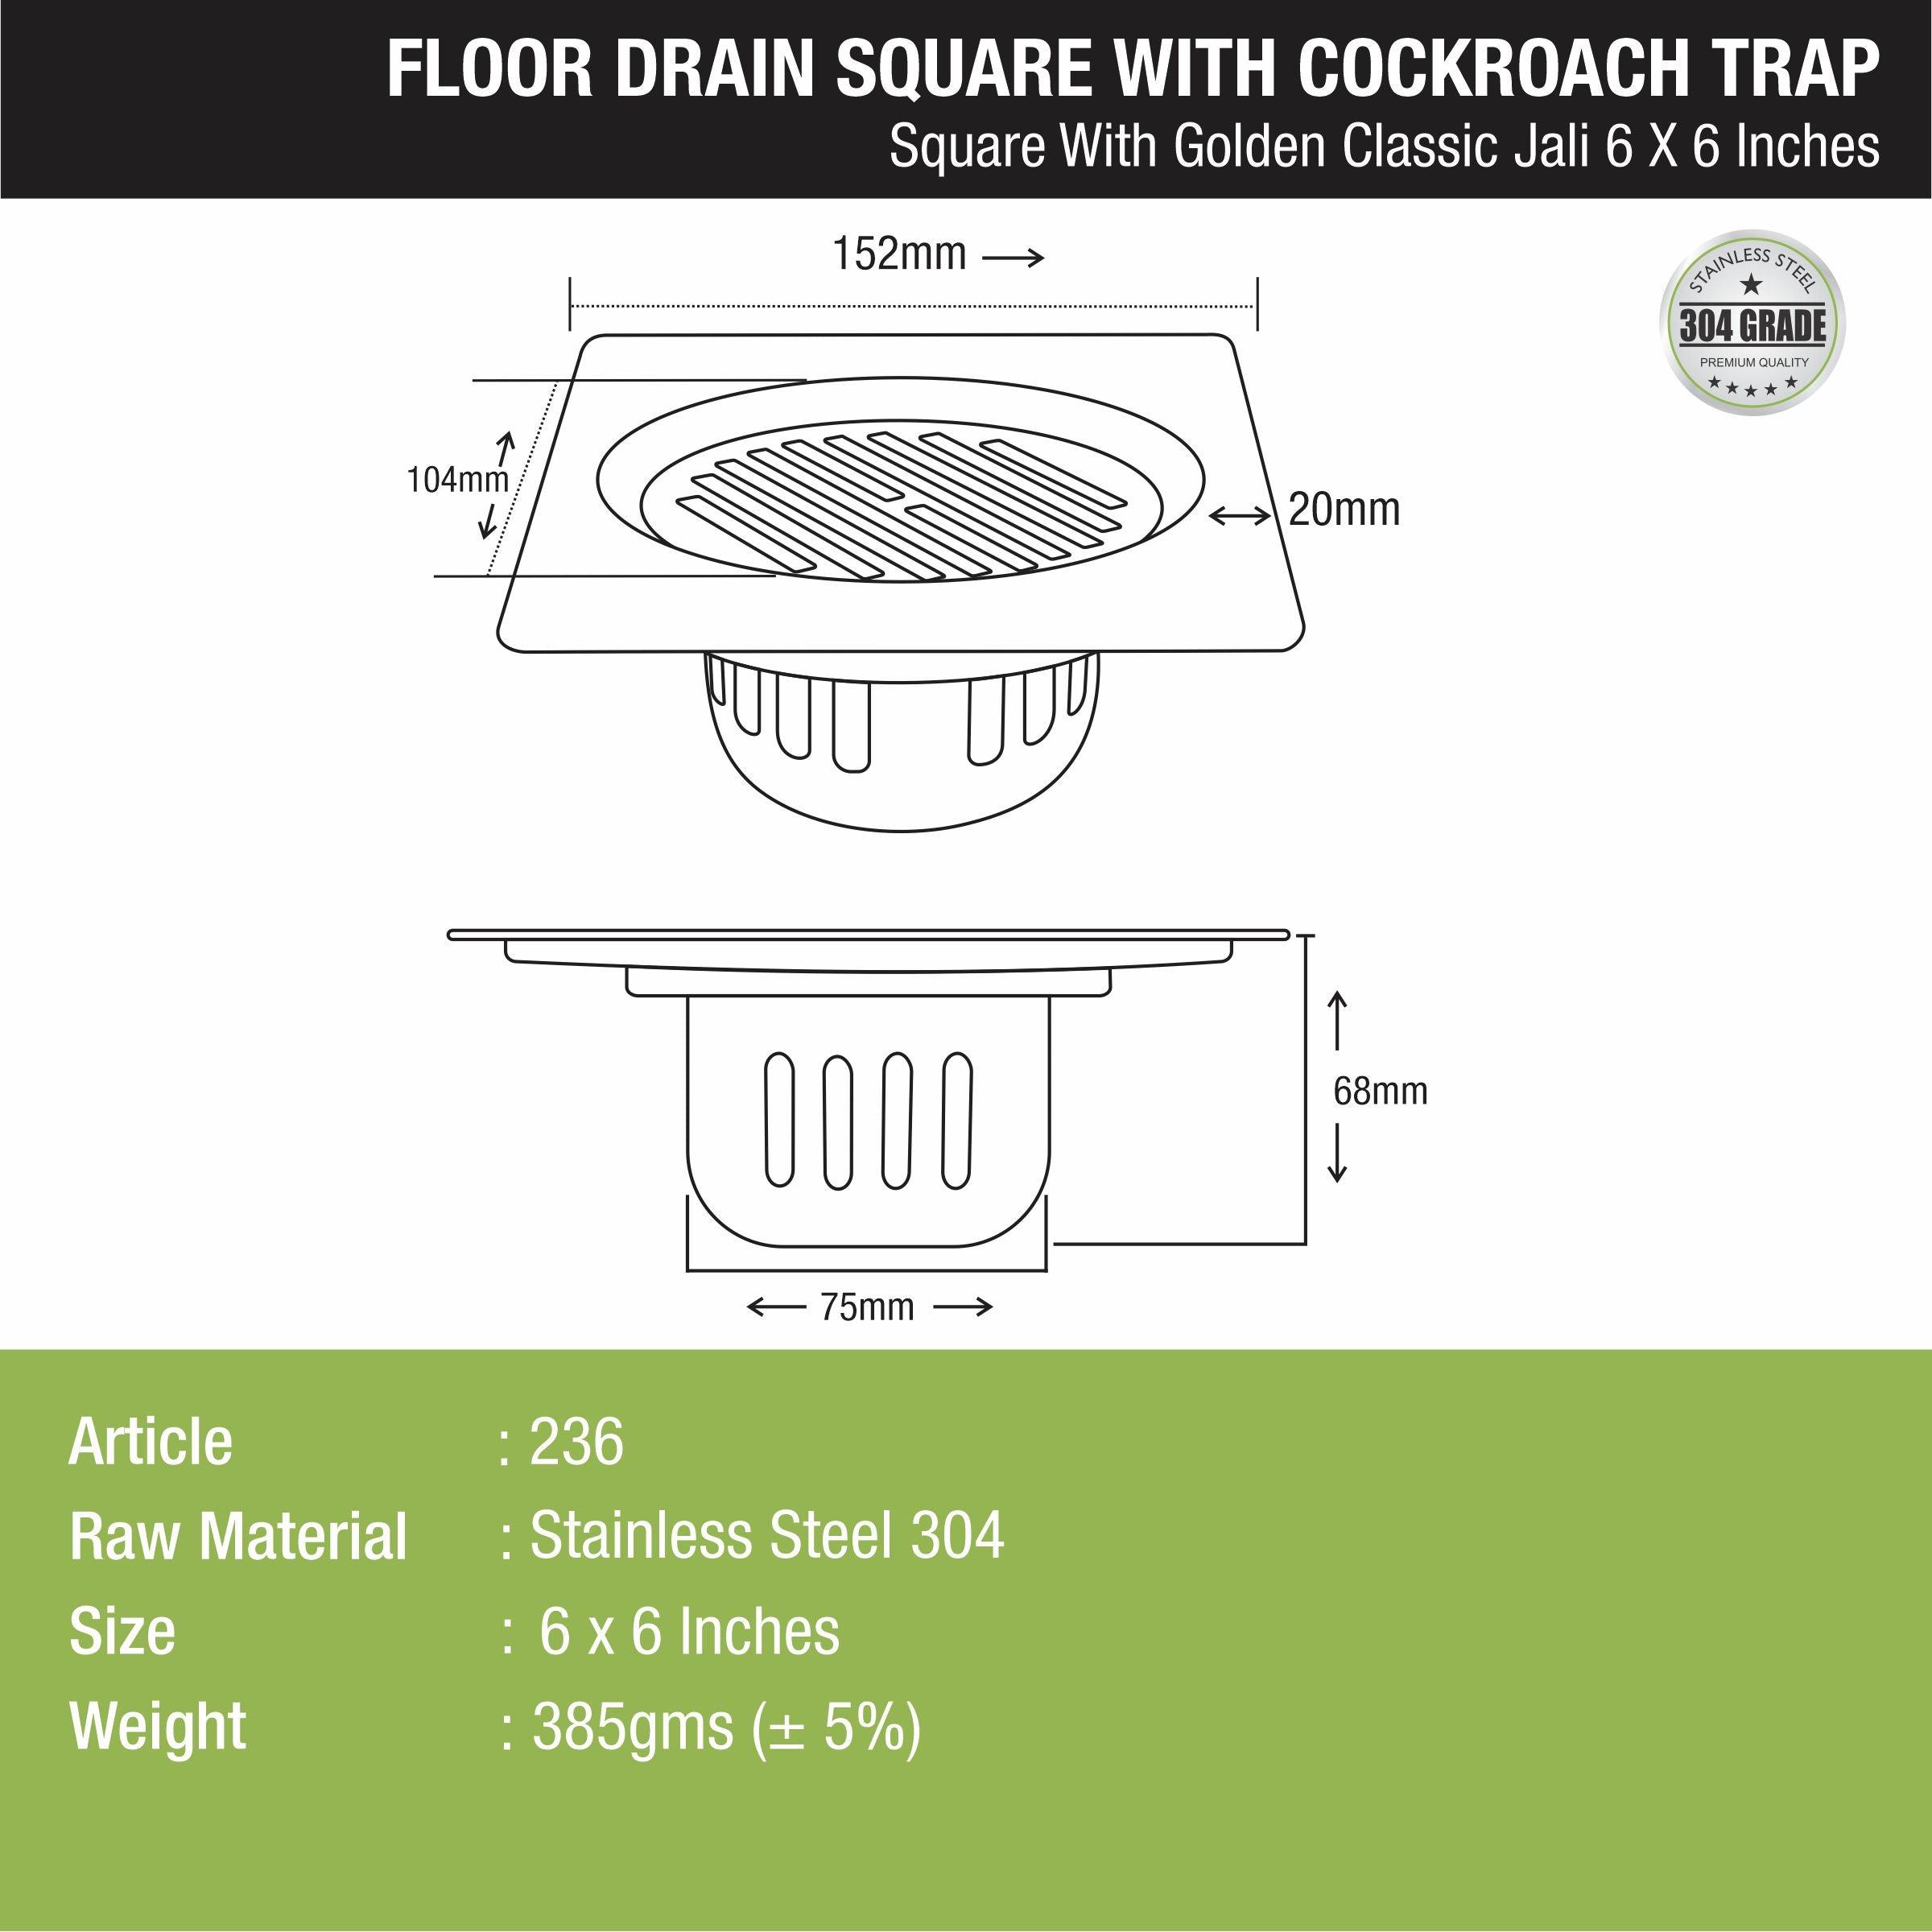 Golden Classic Jali Square Floor Drain (6 x 6 Inches) with Cockroach Trap - LIPKA - Lipka Home